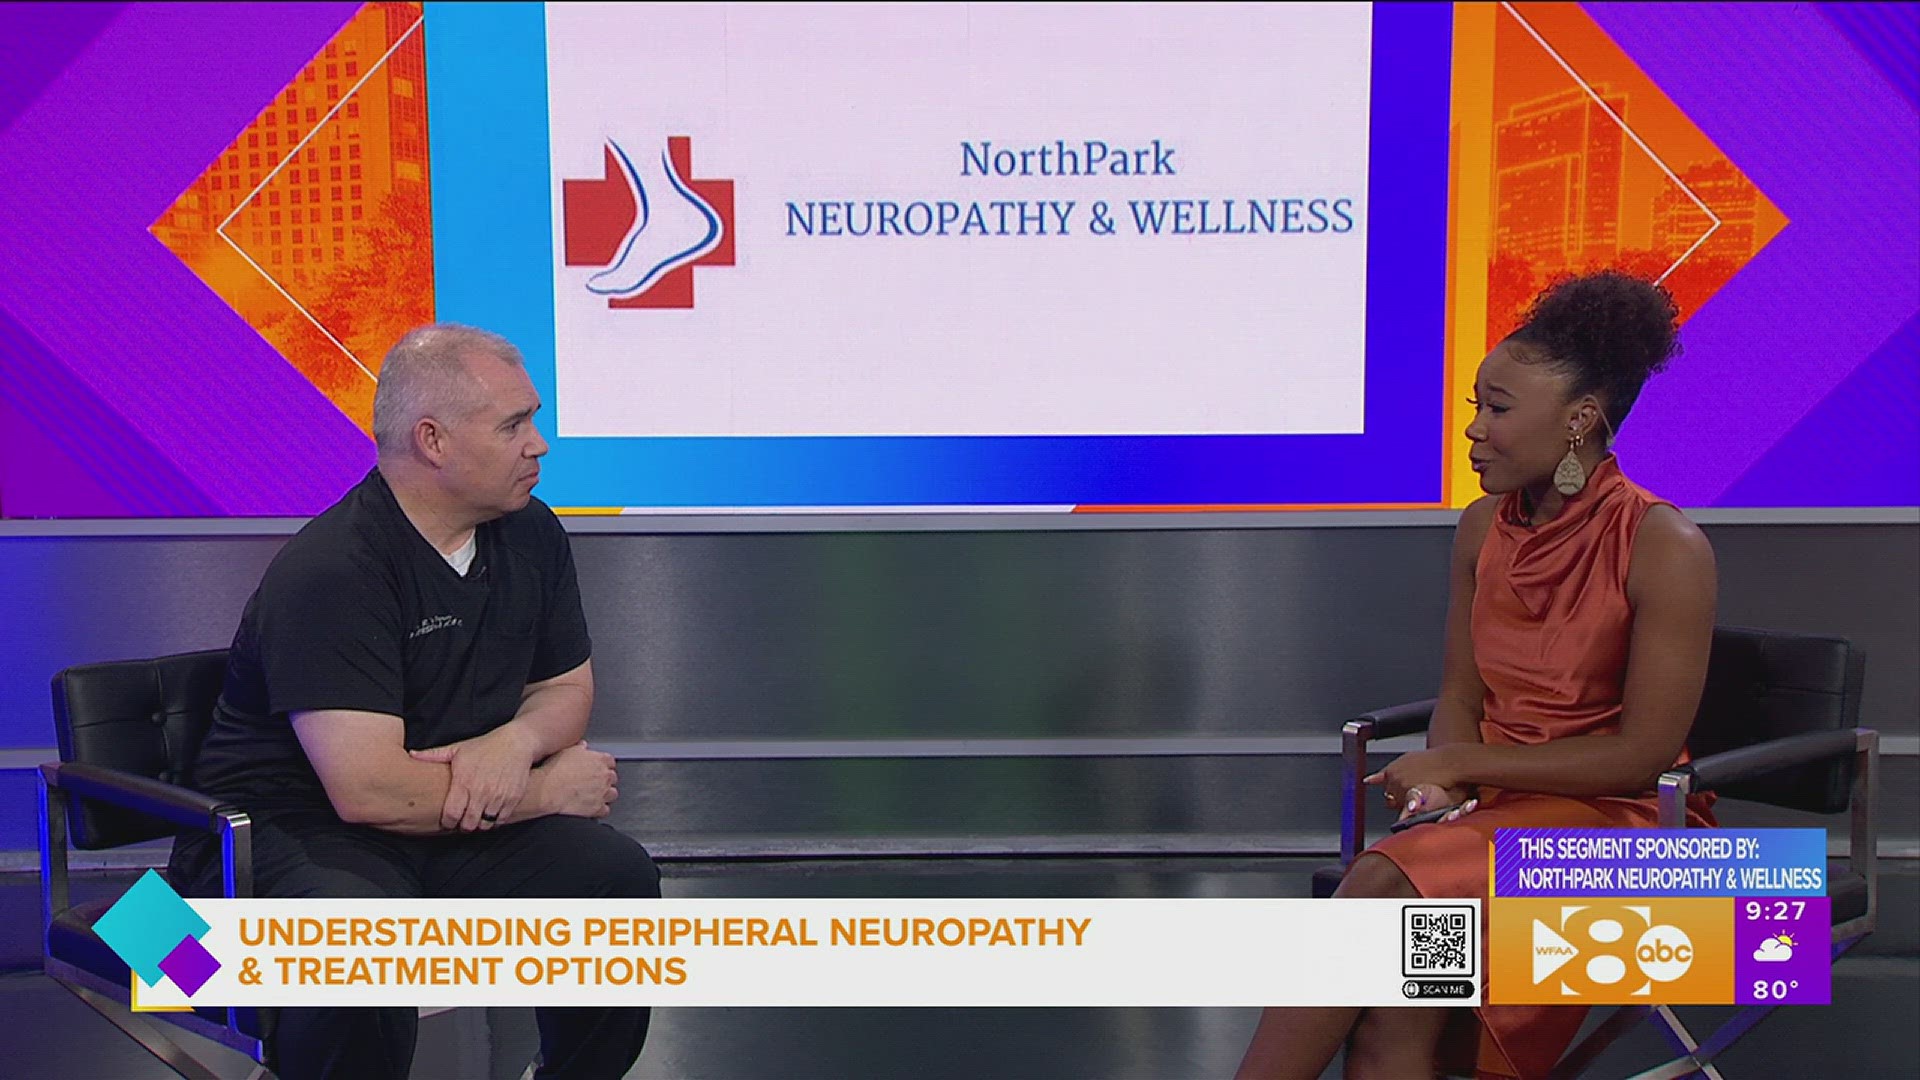 This segment is sponsored by NorthPark Neuropathy & Wellness. Go to northparkneuropathy.com or 214.739.2225 for more information.